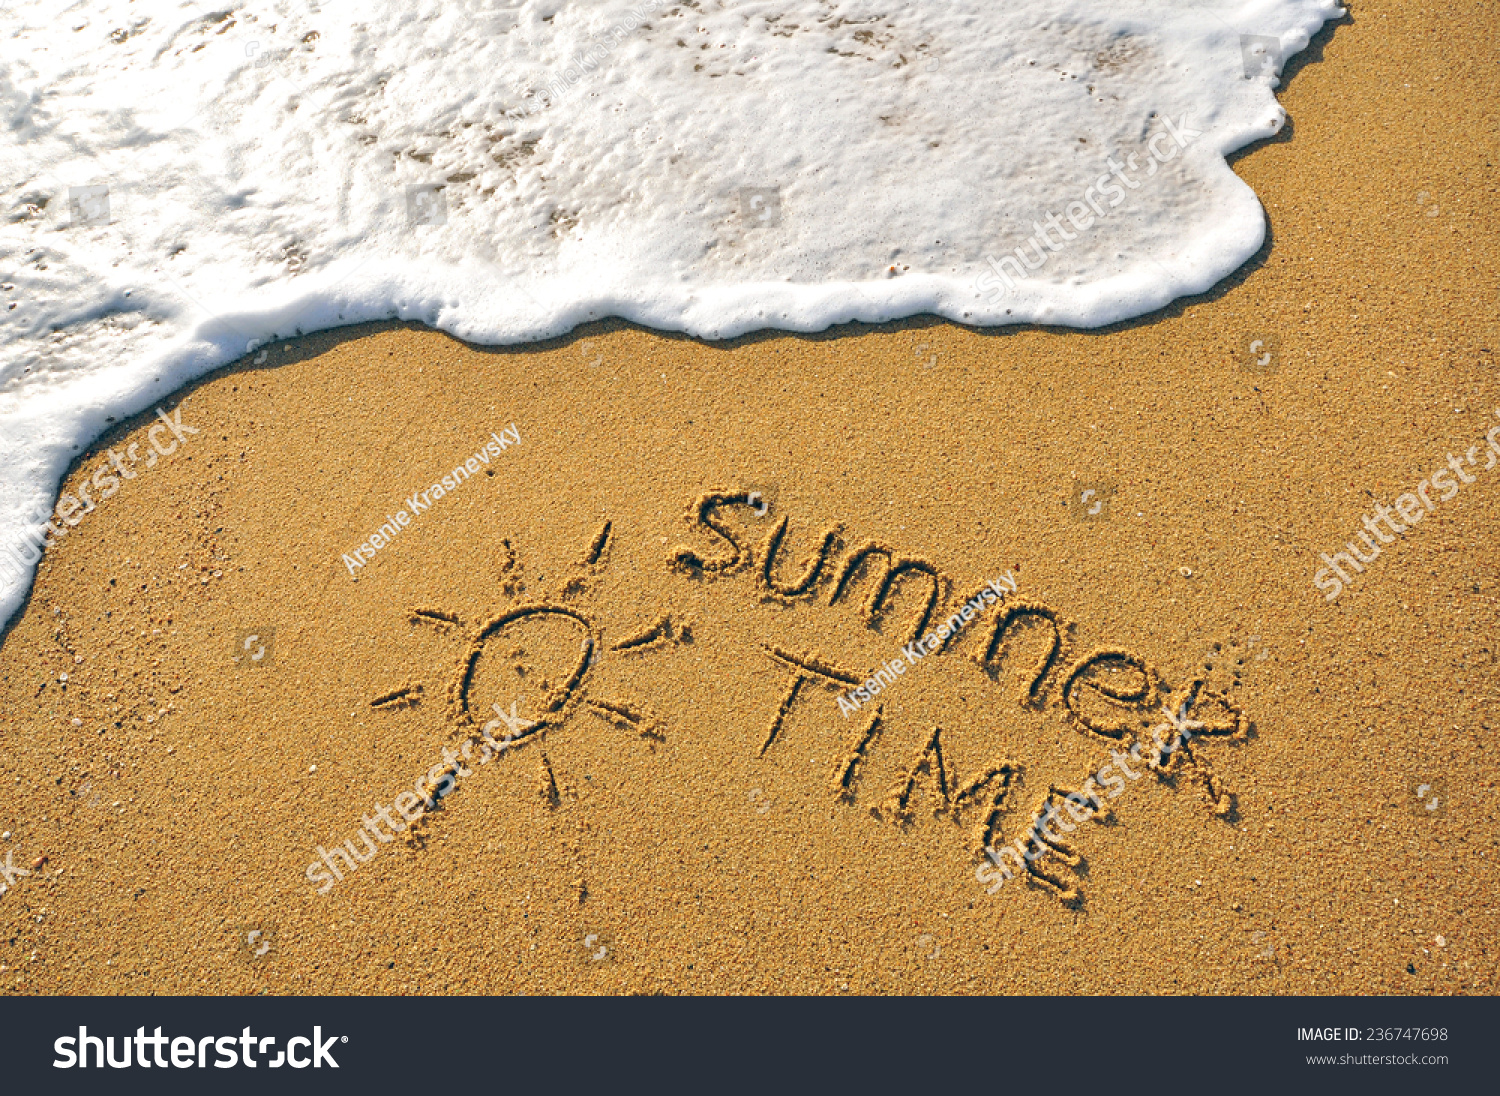 Summer Time message written in the sand on a beautiful beach, capturing the essence of a sunny and relaxing seaside vacation #236747698